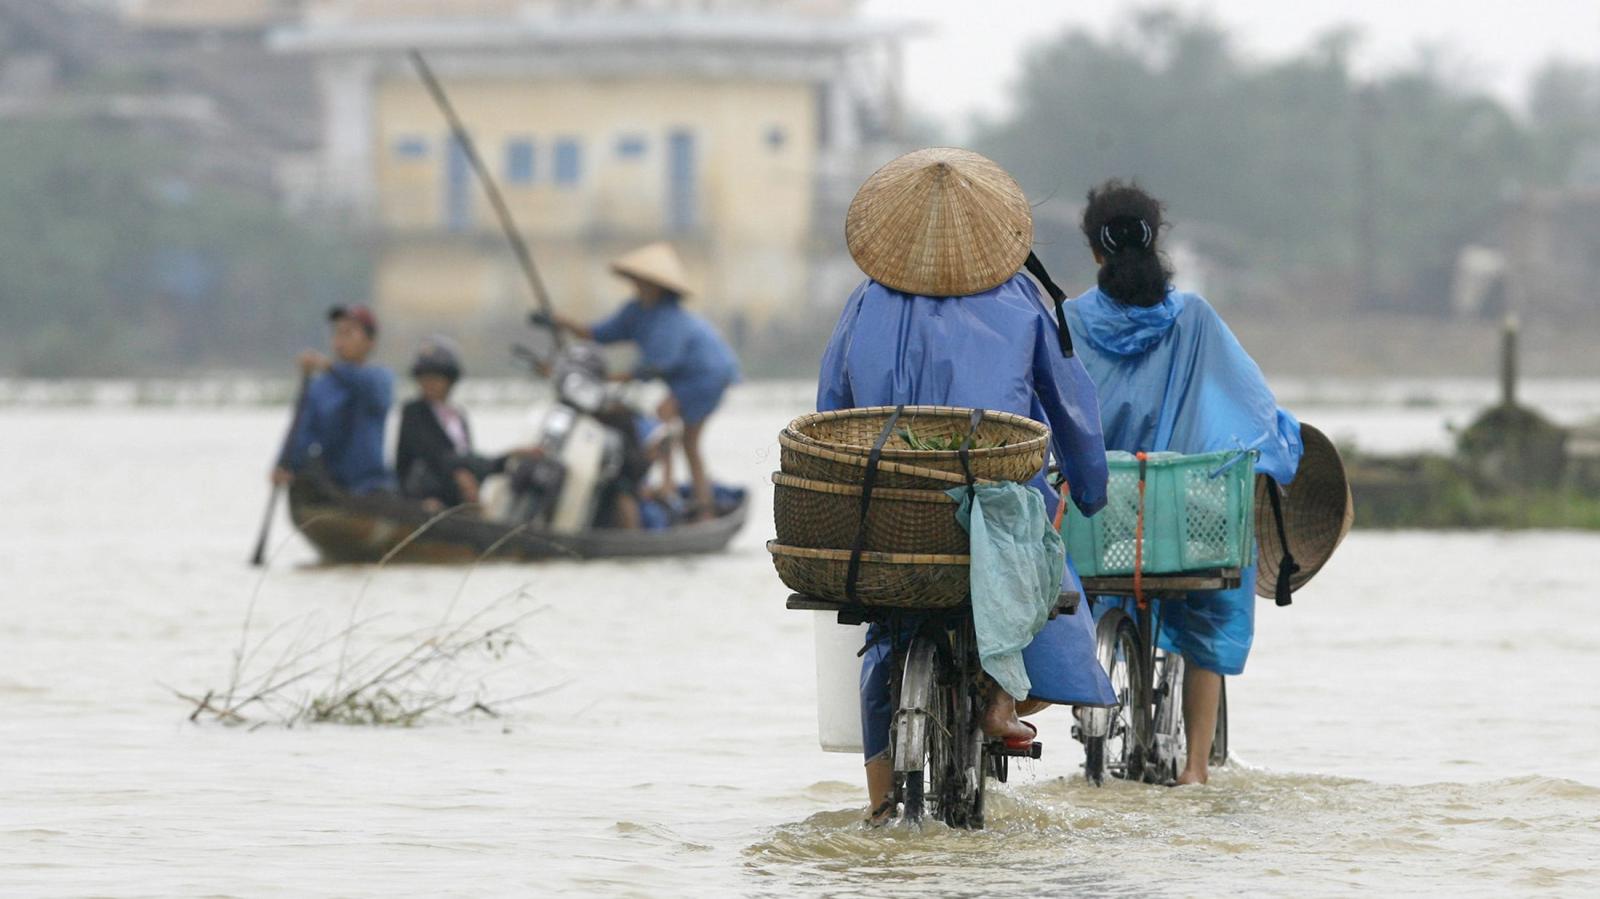 In Vietnam’s Thua Thien Hue province, the threat of climate change is all too real.